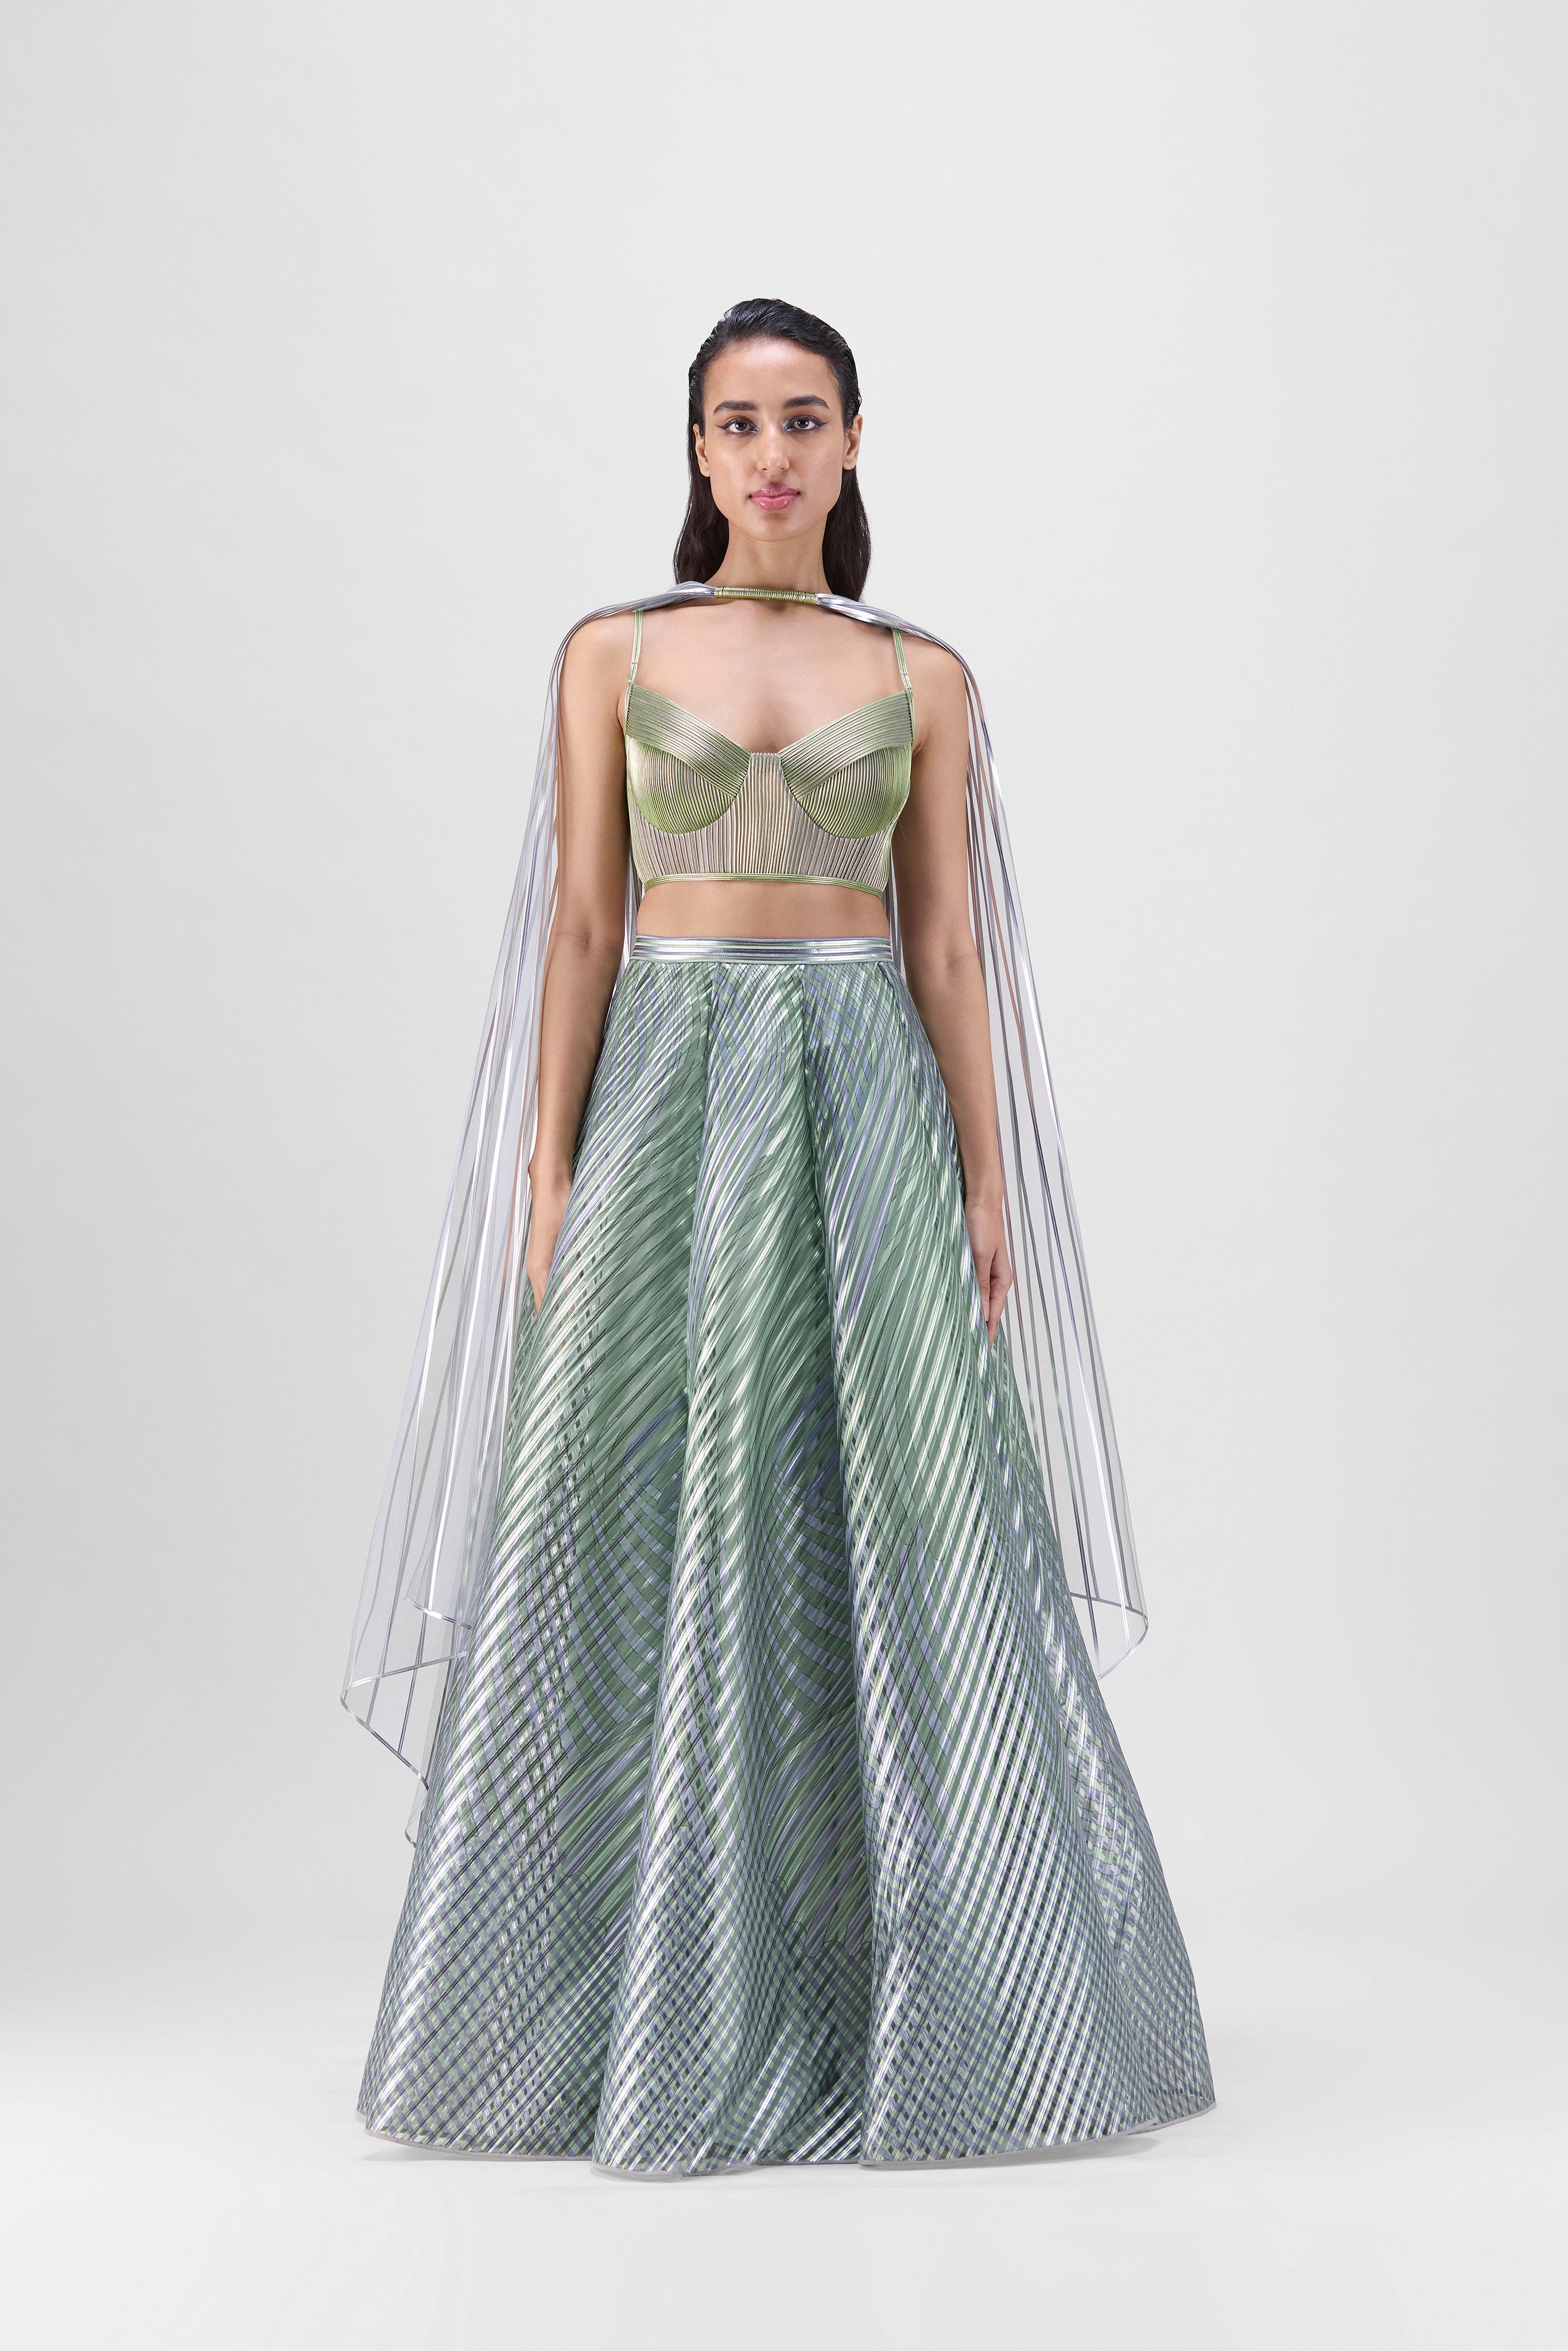 METALLIC FLUTED TULLE PRINTED SKIRT WITH A CORDED BUSTIER